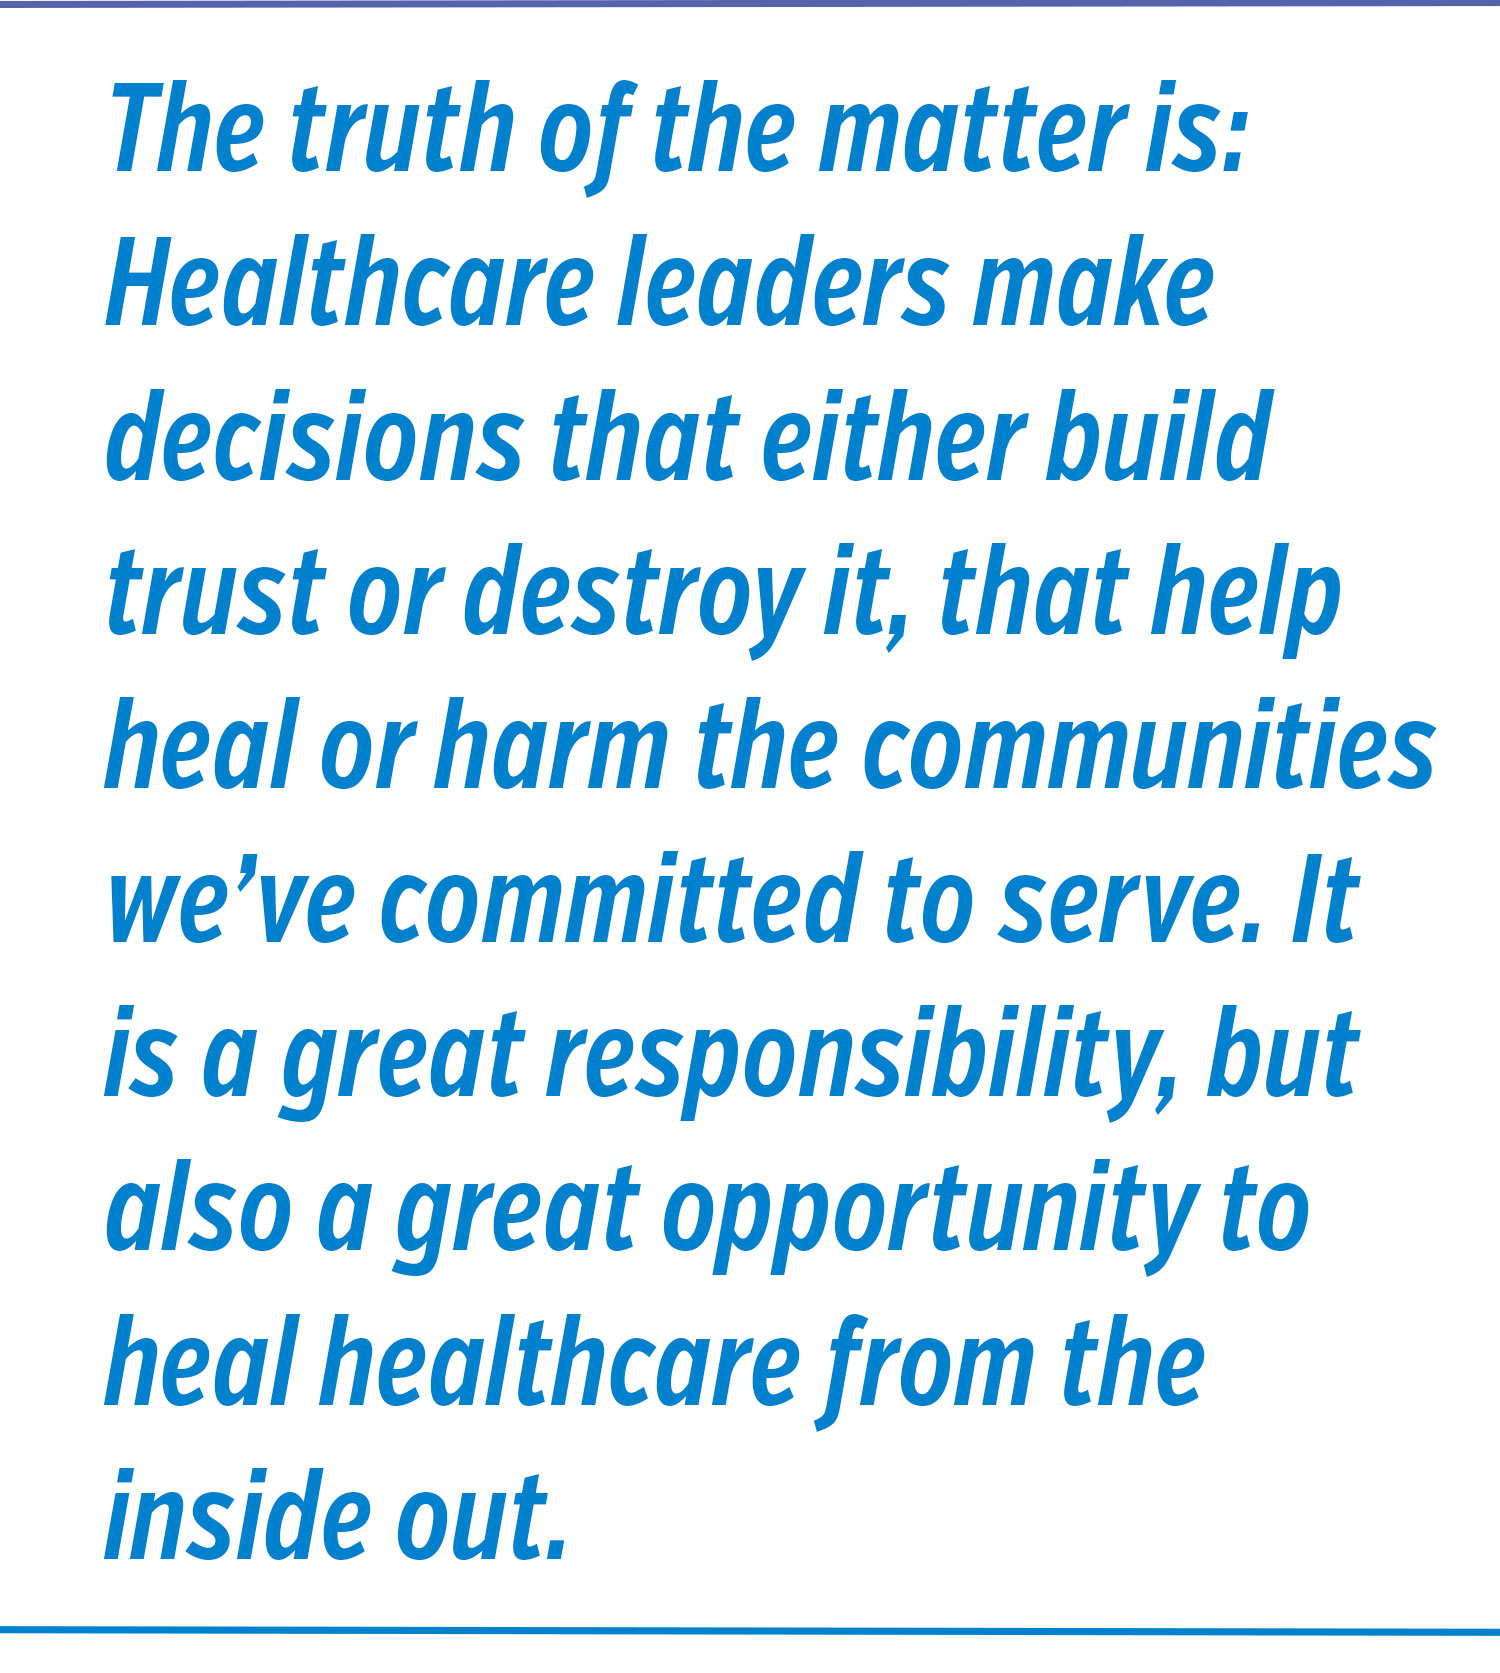 The truth of the matter is: Healthcare leaders make decisions that either build trust o destroy it, that help heal or harm the communities we've committed to serve. It is a great responsibility, but also a great opportunity to heal healthcare from the inside out